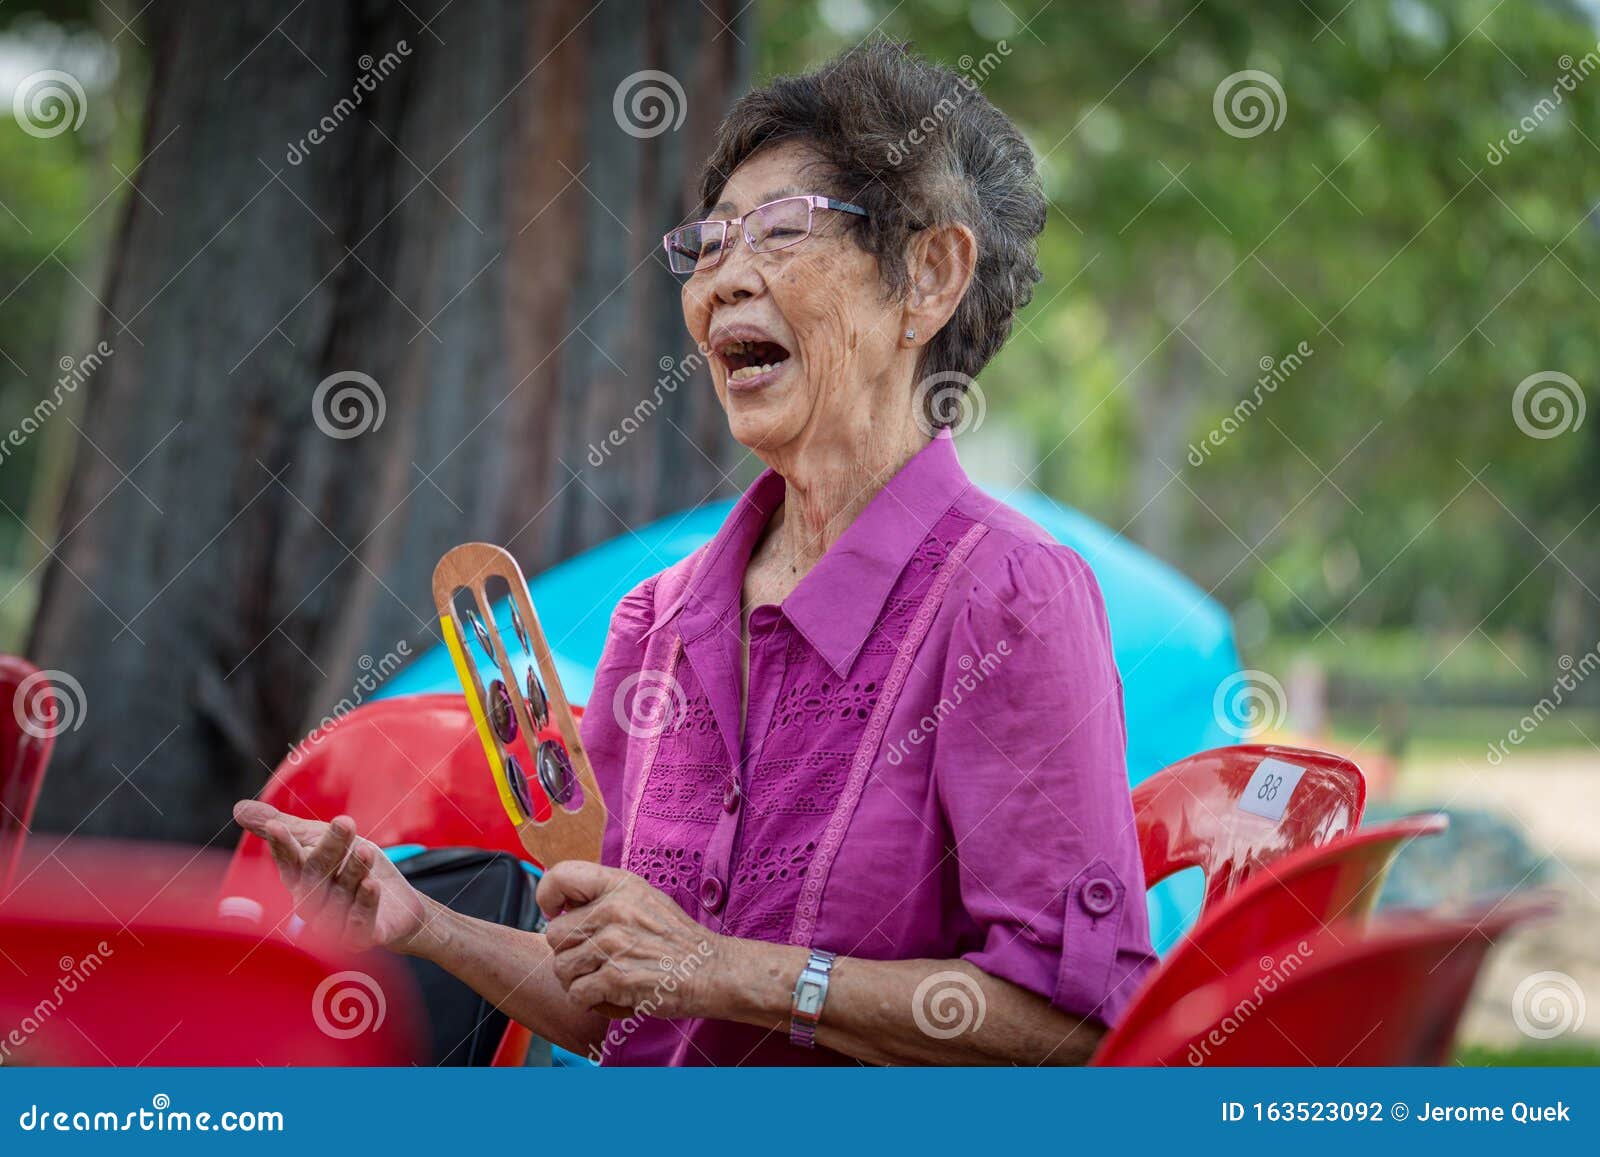 Singapore June 15th 2019 Group Of Seniors Elderly Retired Asian Men Women Playing Musical Instrument Singing Happily Enjoying Editorial Photography Image Of Grandmother Aged 163523092